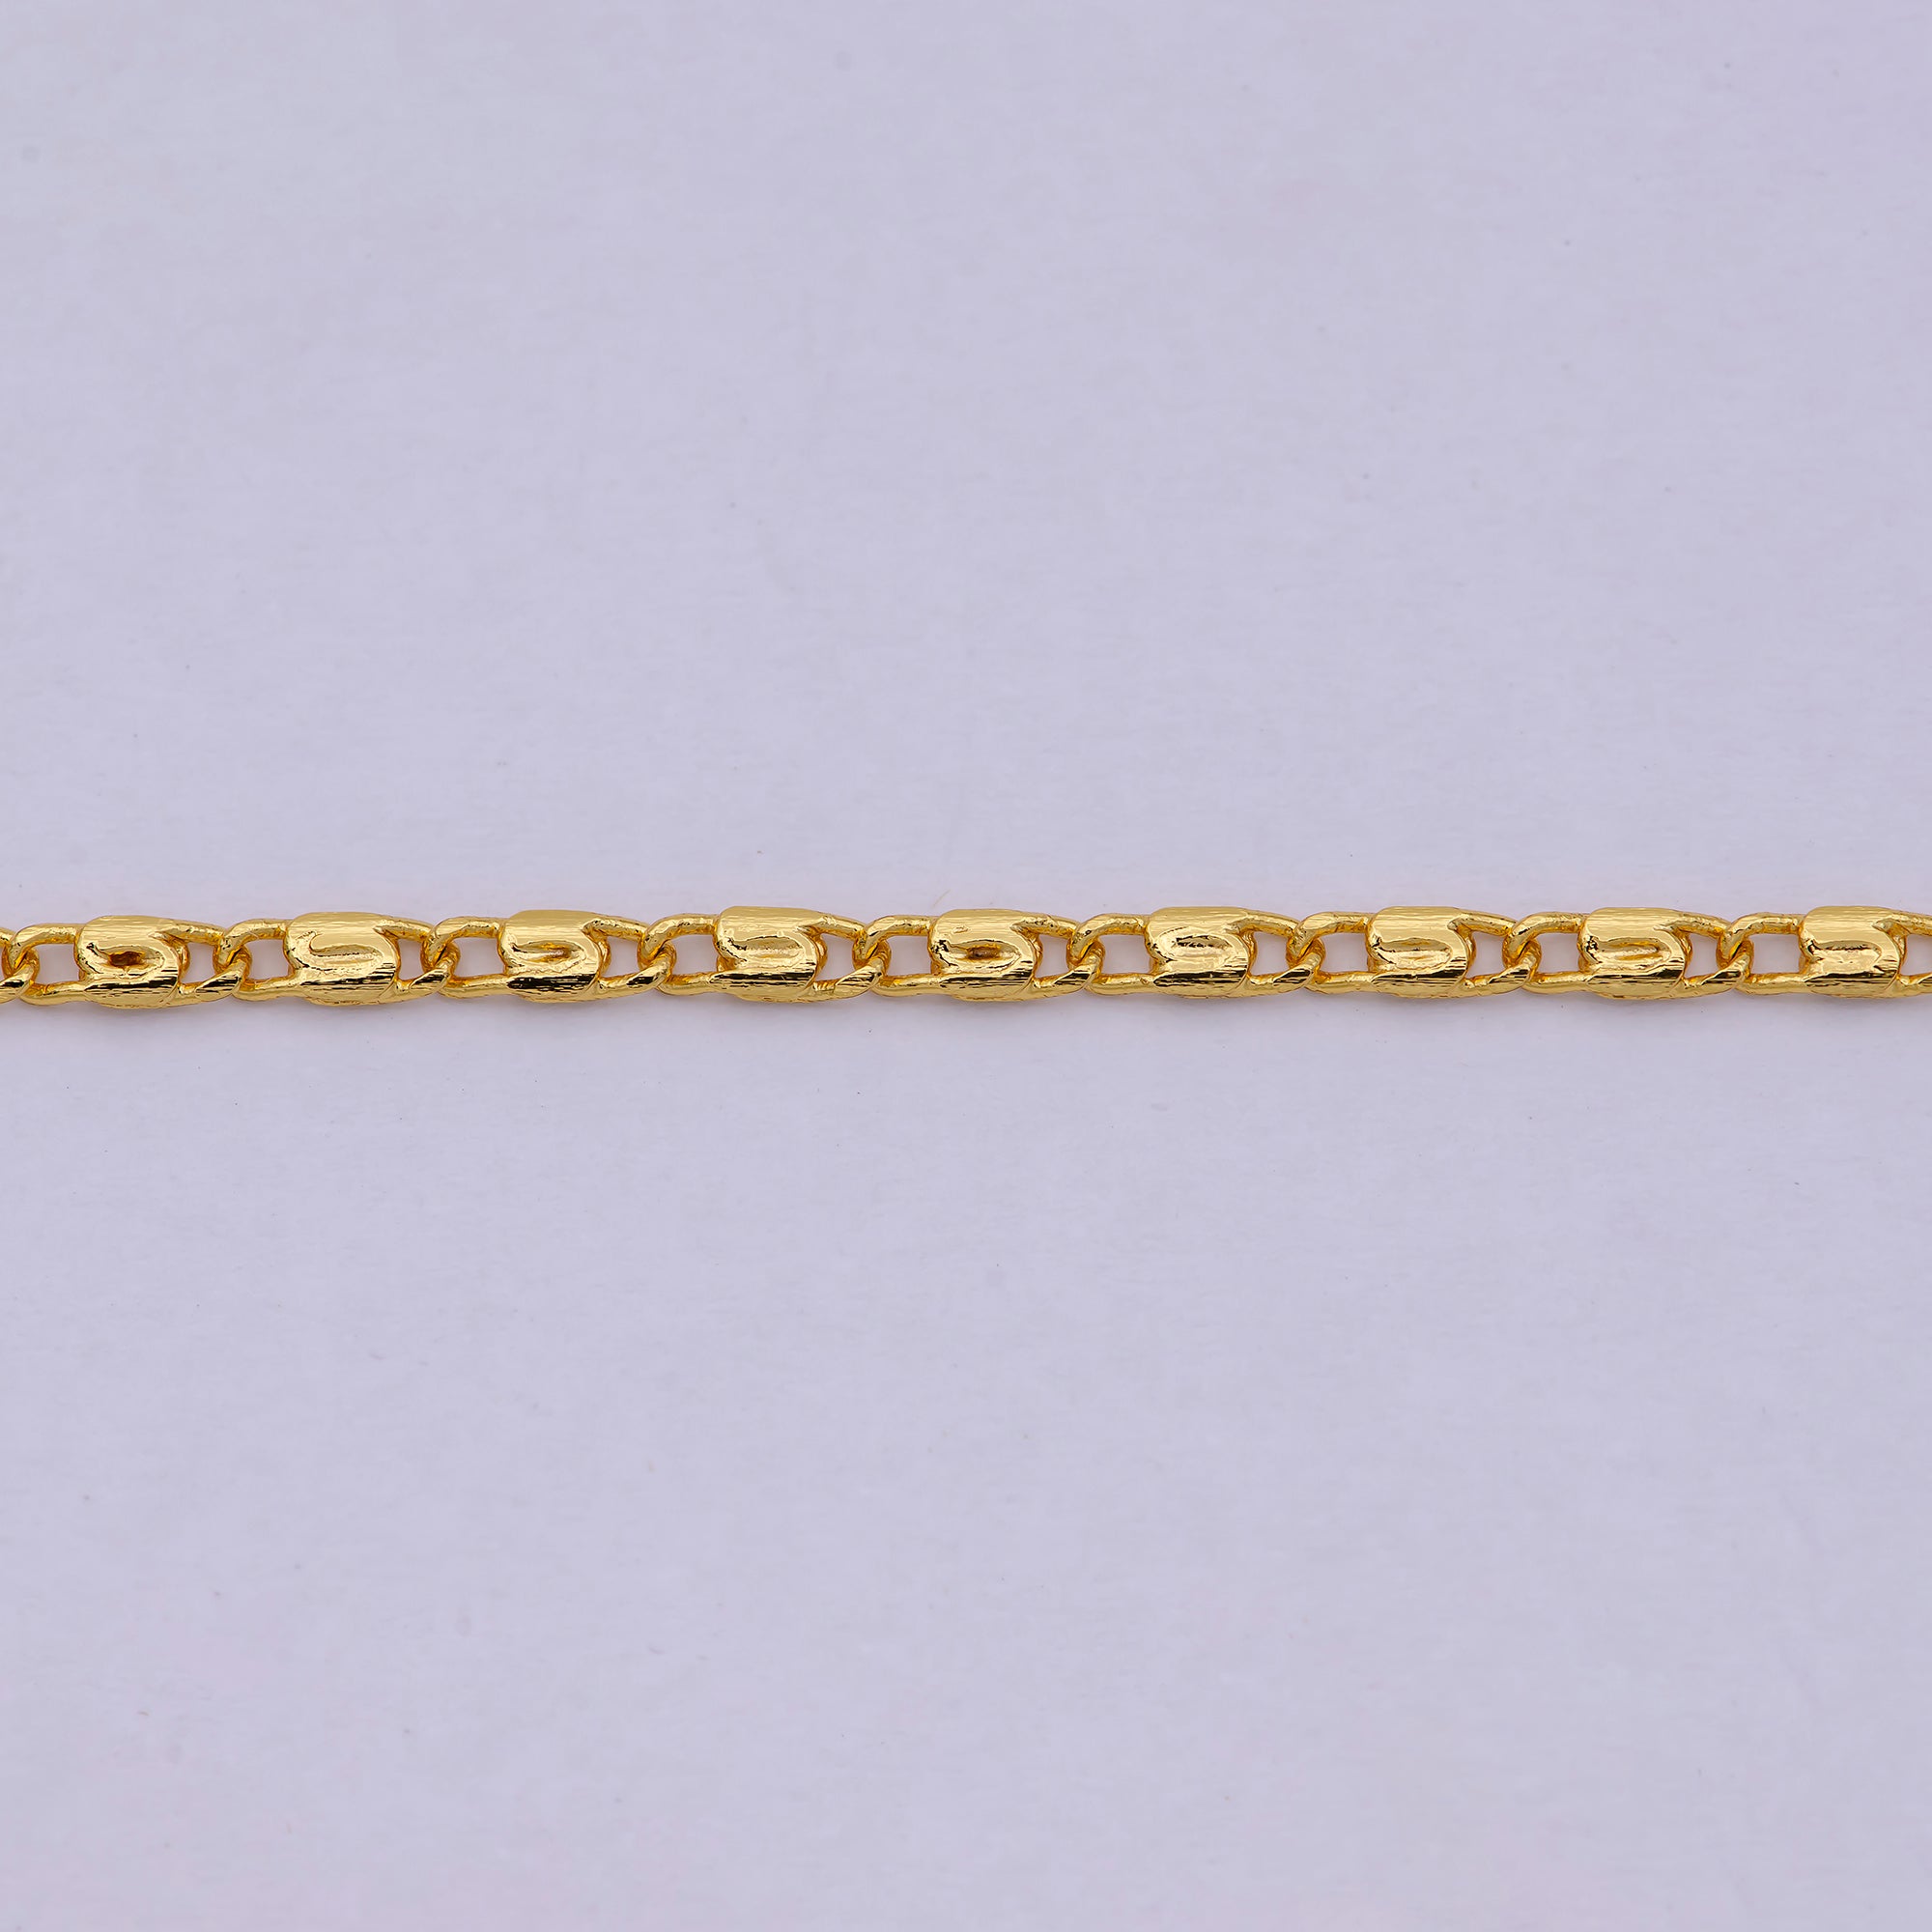 Dainty Snail Chain Necklace, Gold Scroll Chain, S Curb Chain, 24K Gold Filled Necklace 18 inch long WA-536 - DLUXCA